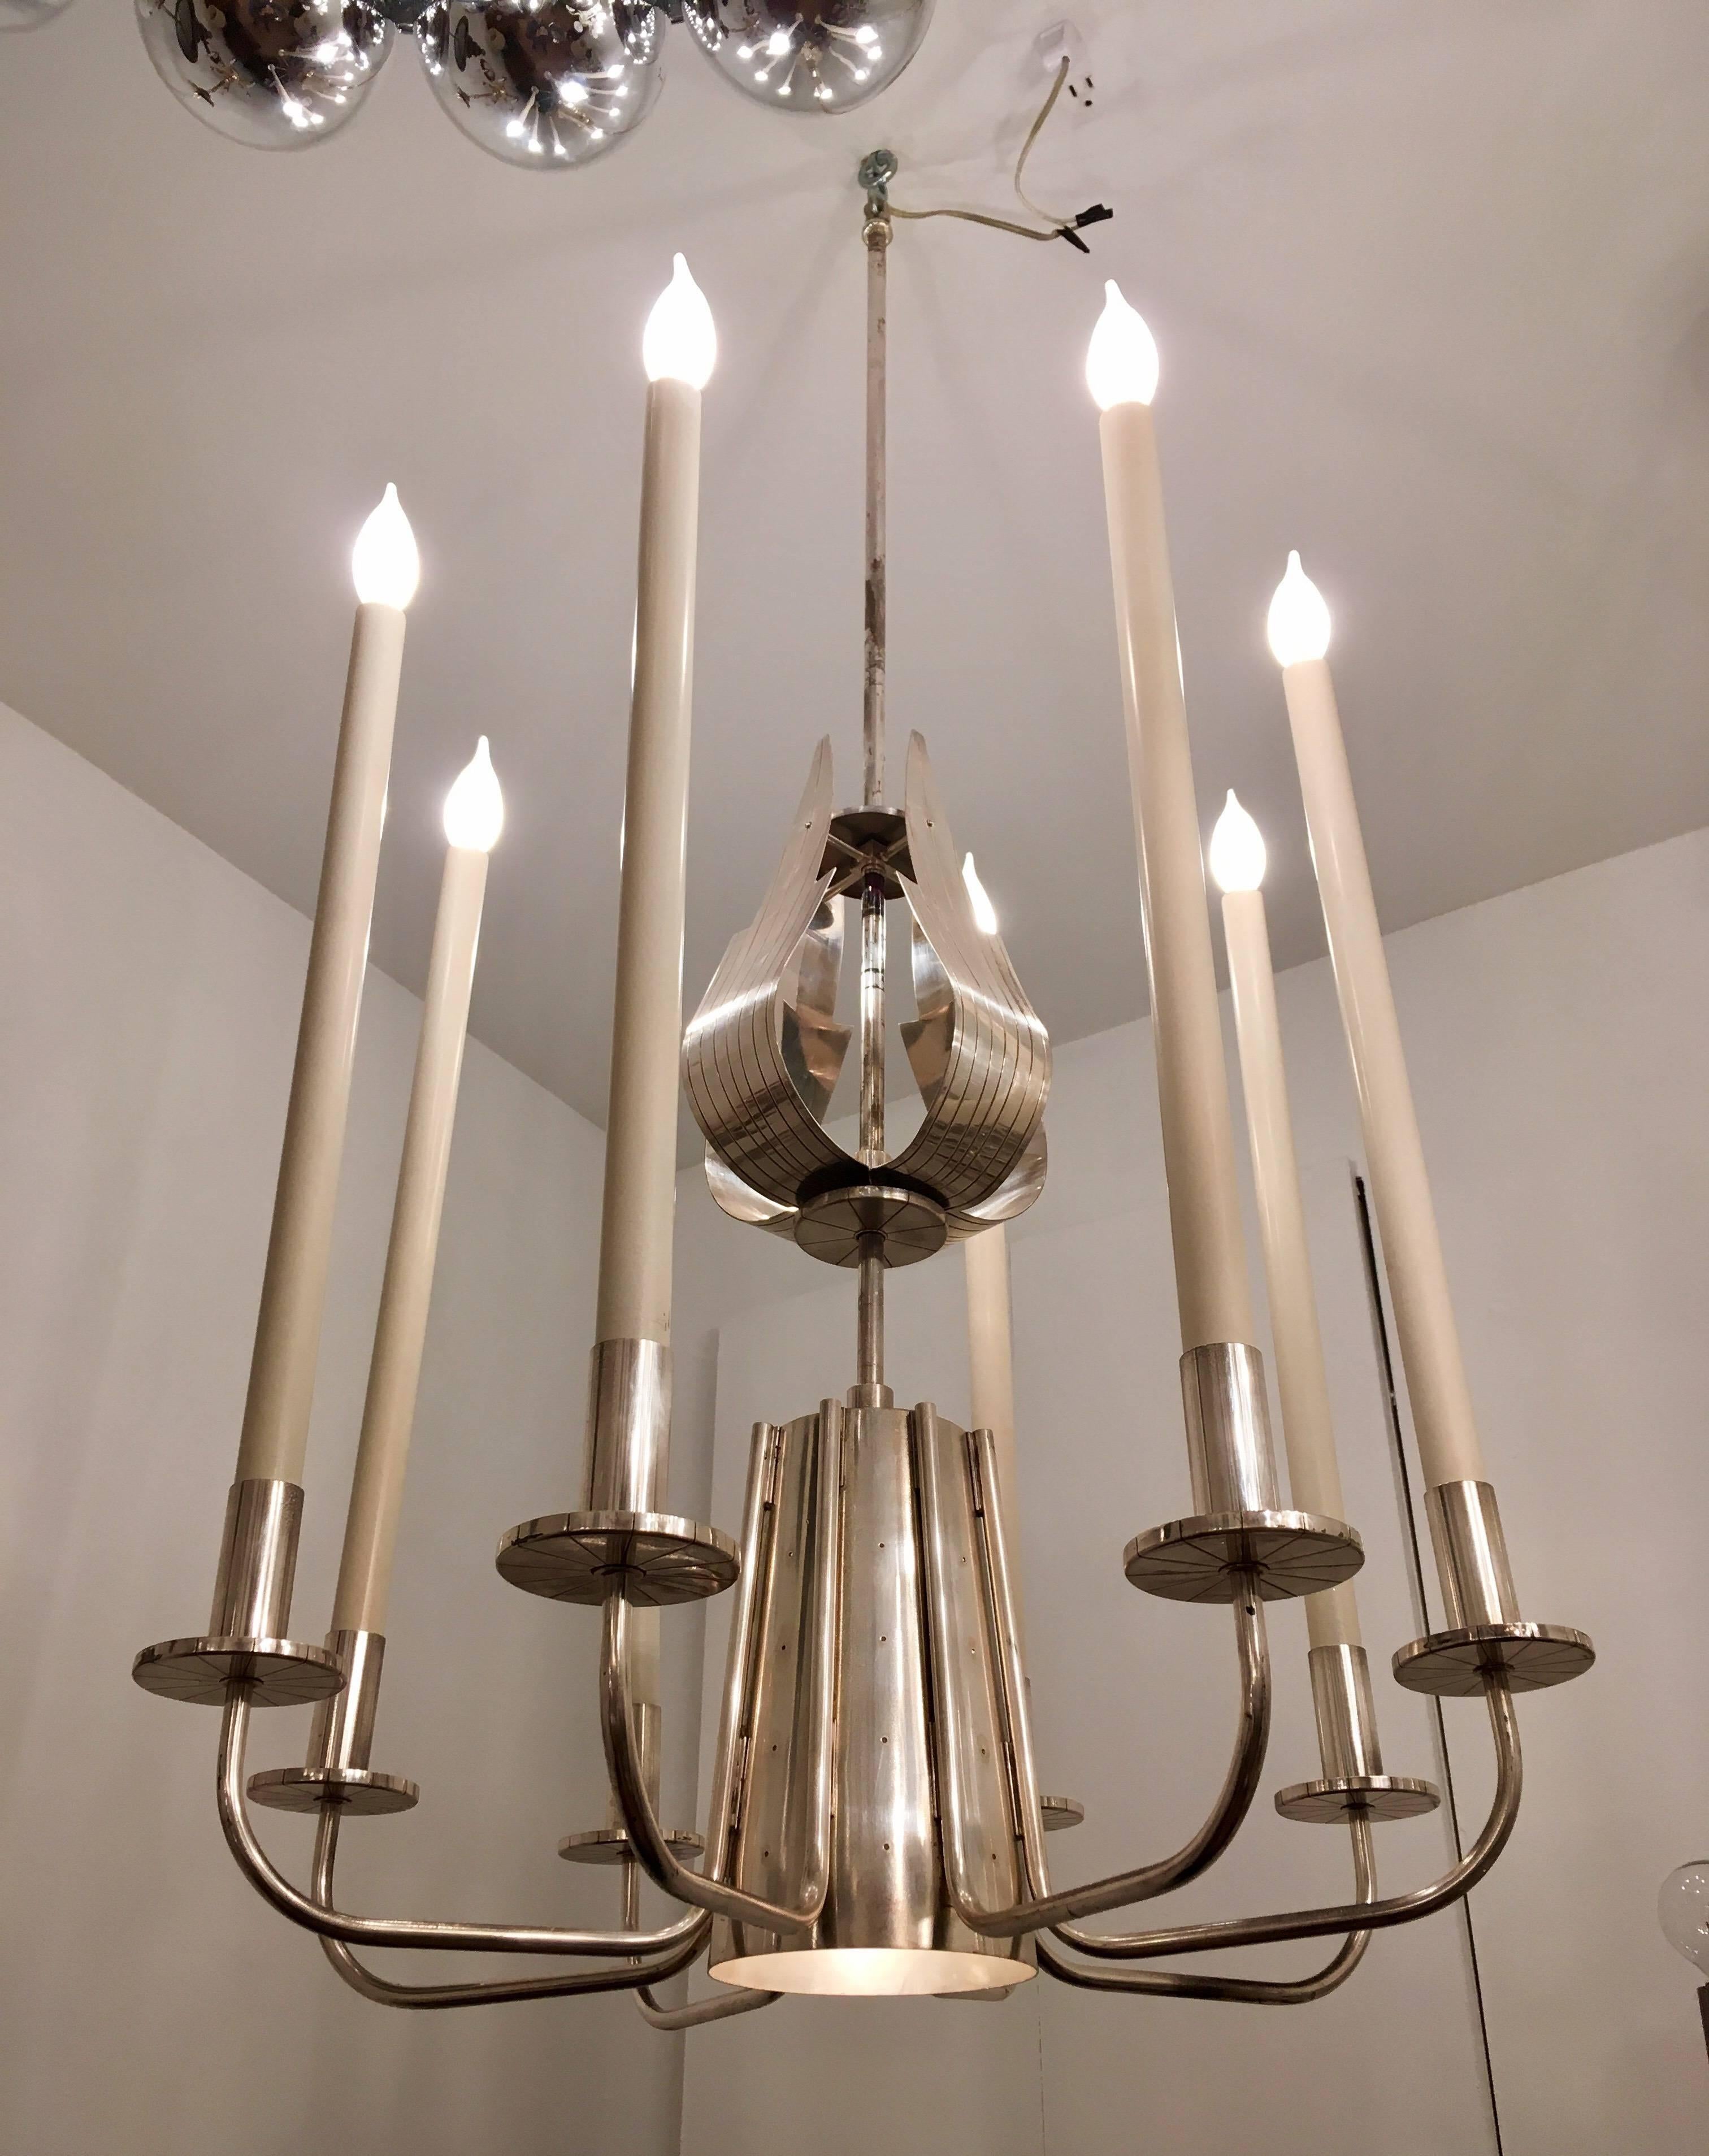 An original, elegant 1960s Tommi Parzinger design in plated silver with hand tooled decorative elements. Nine-light sources, including the large downward light. Newly rewired. A rare and beautiful design.

Bio:
Tommi Anton Parzinger (1903-1981)